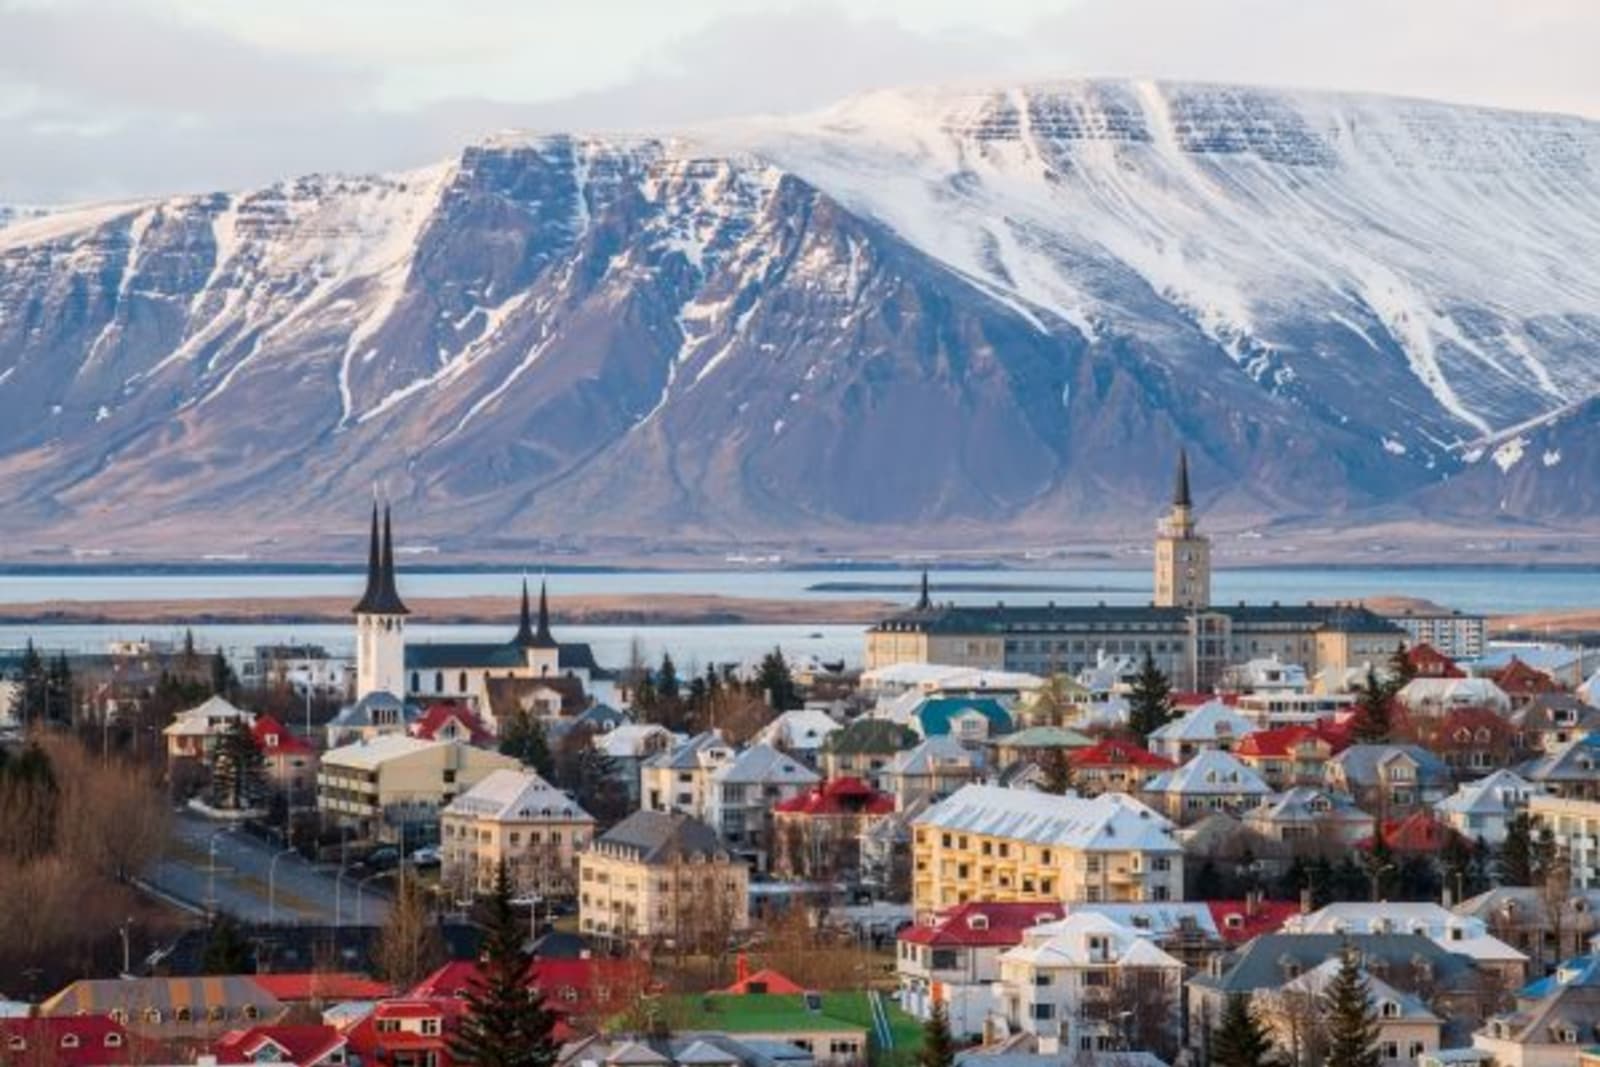 Skyline view of the town Reykjavik with snowy mountain in background